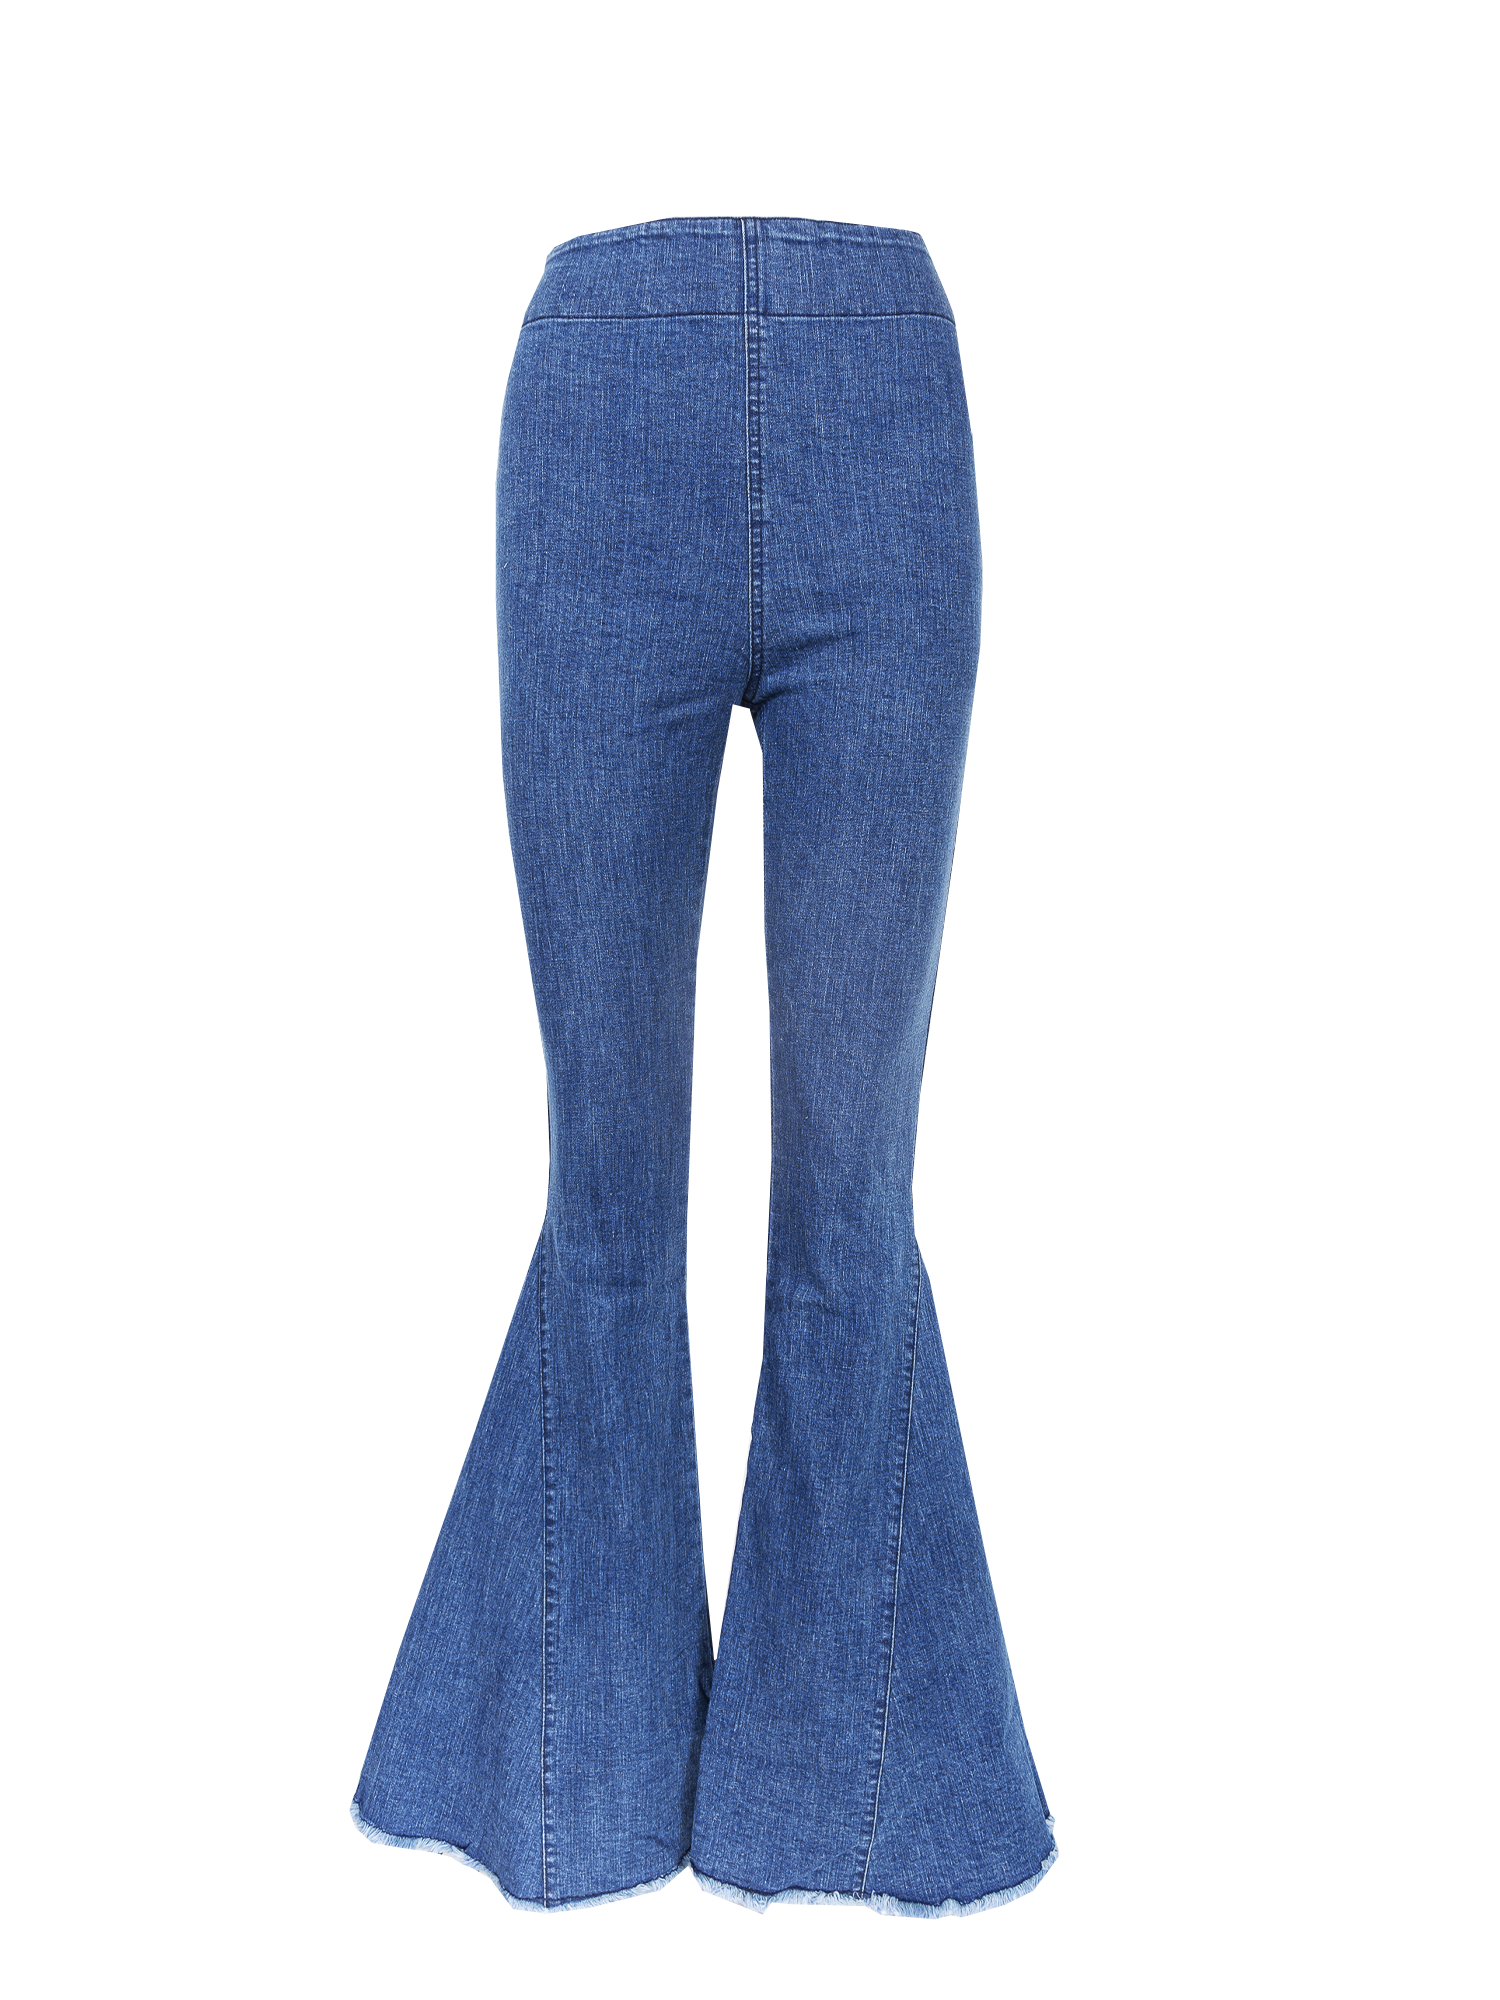 LOLISSIMA - flared jeans pants